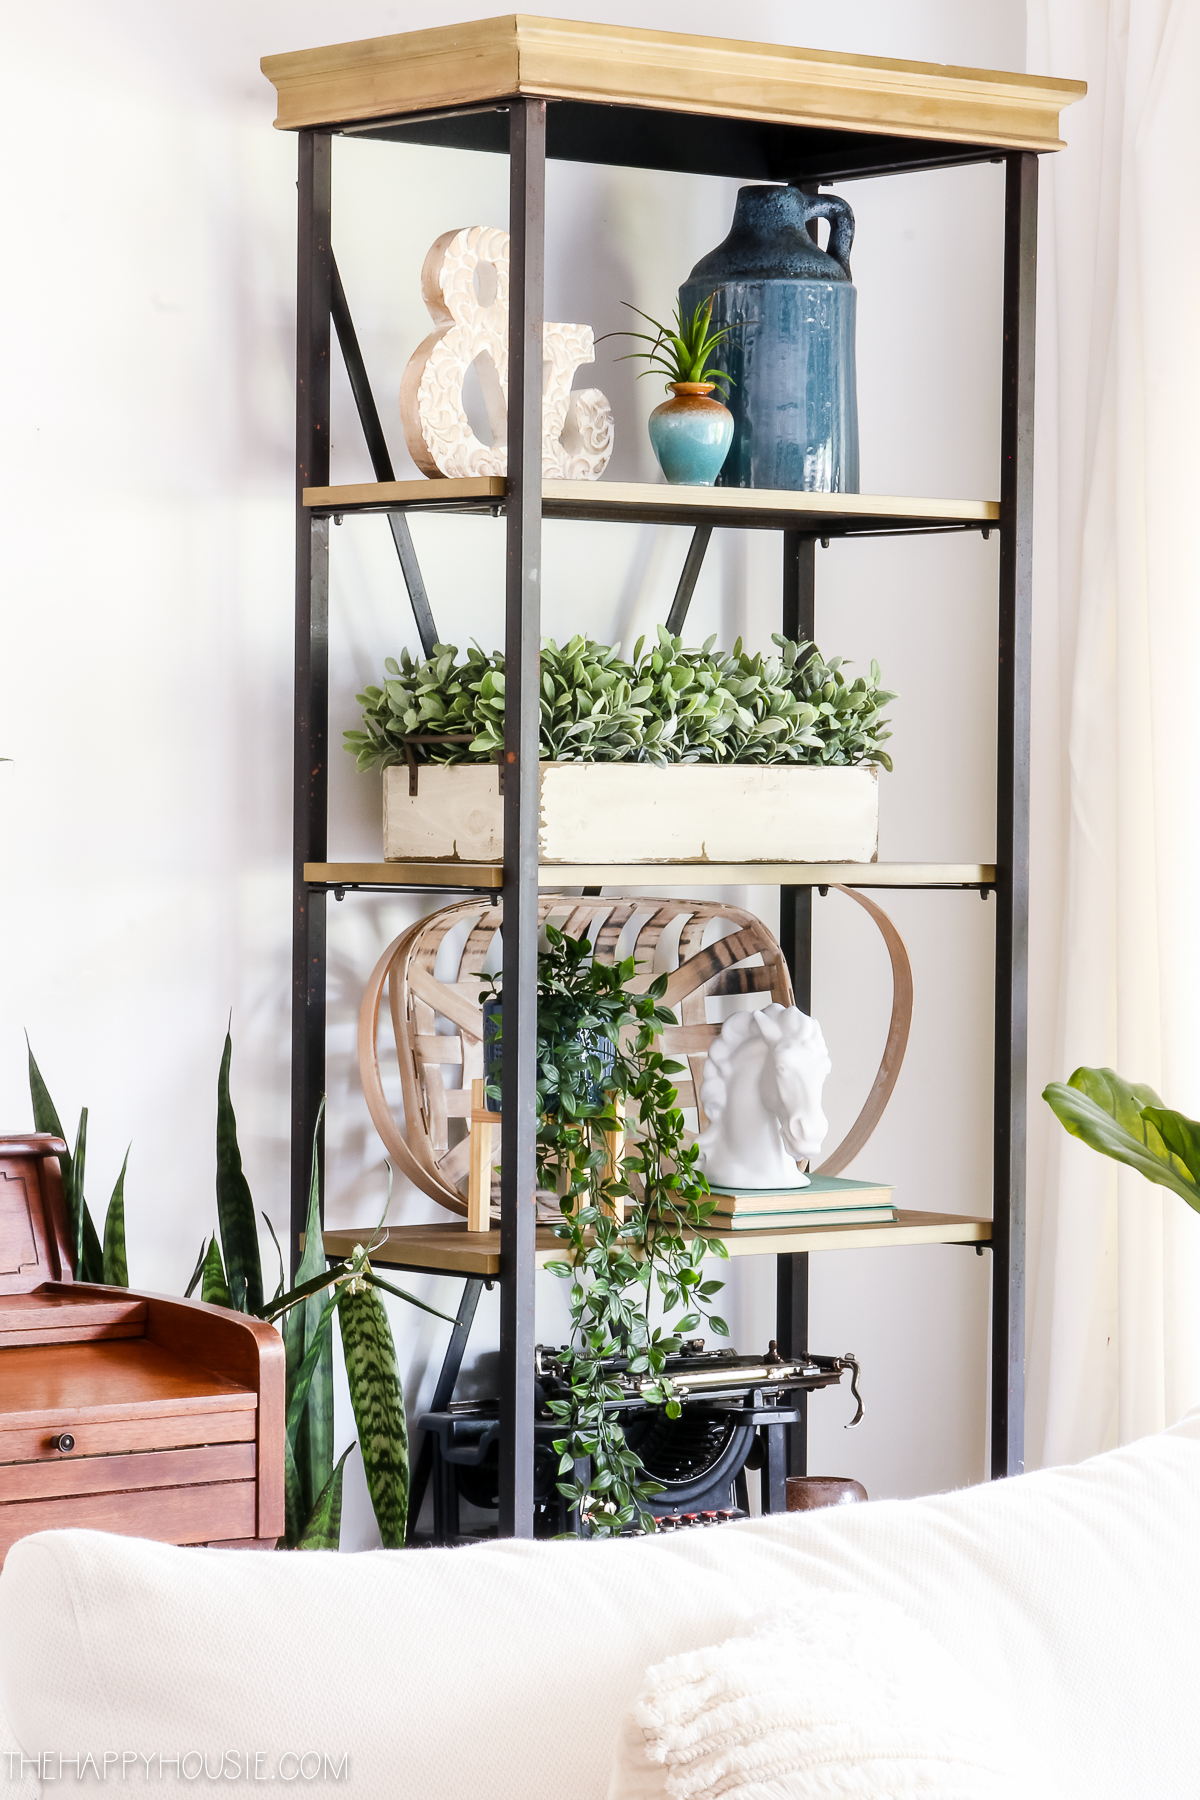 The open shelving unit has an antique typewriter, potted plants, and various knick knacks.